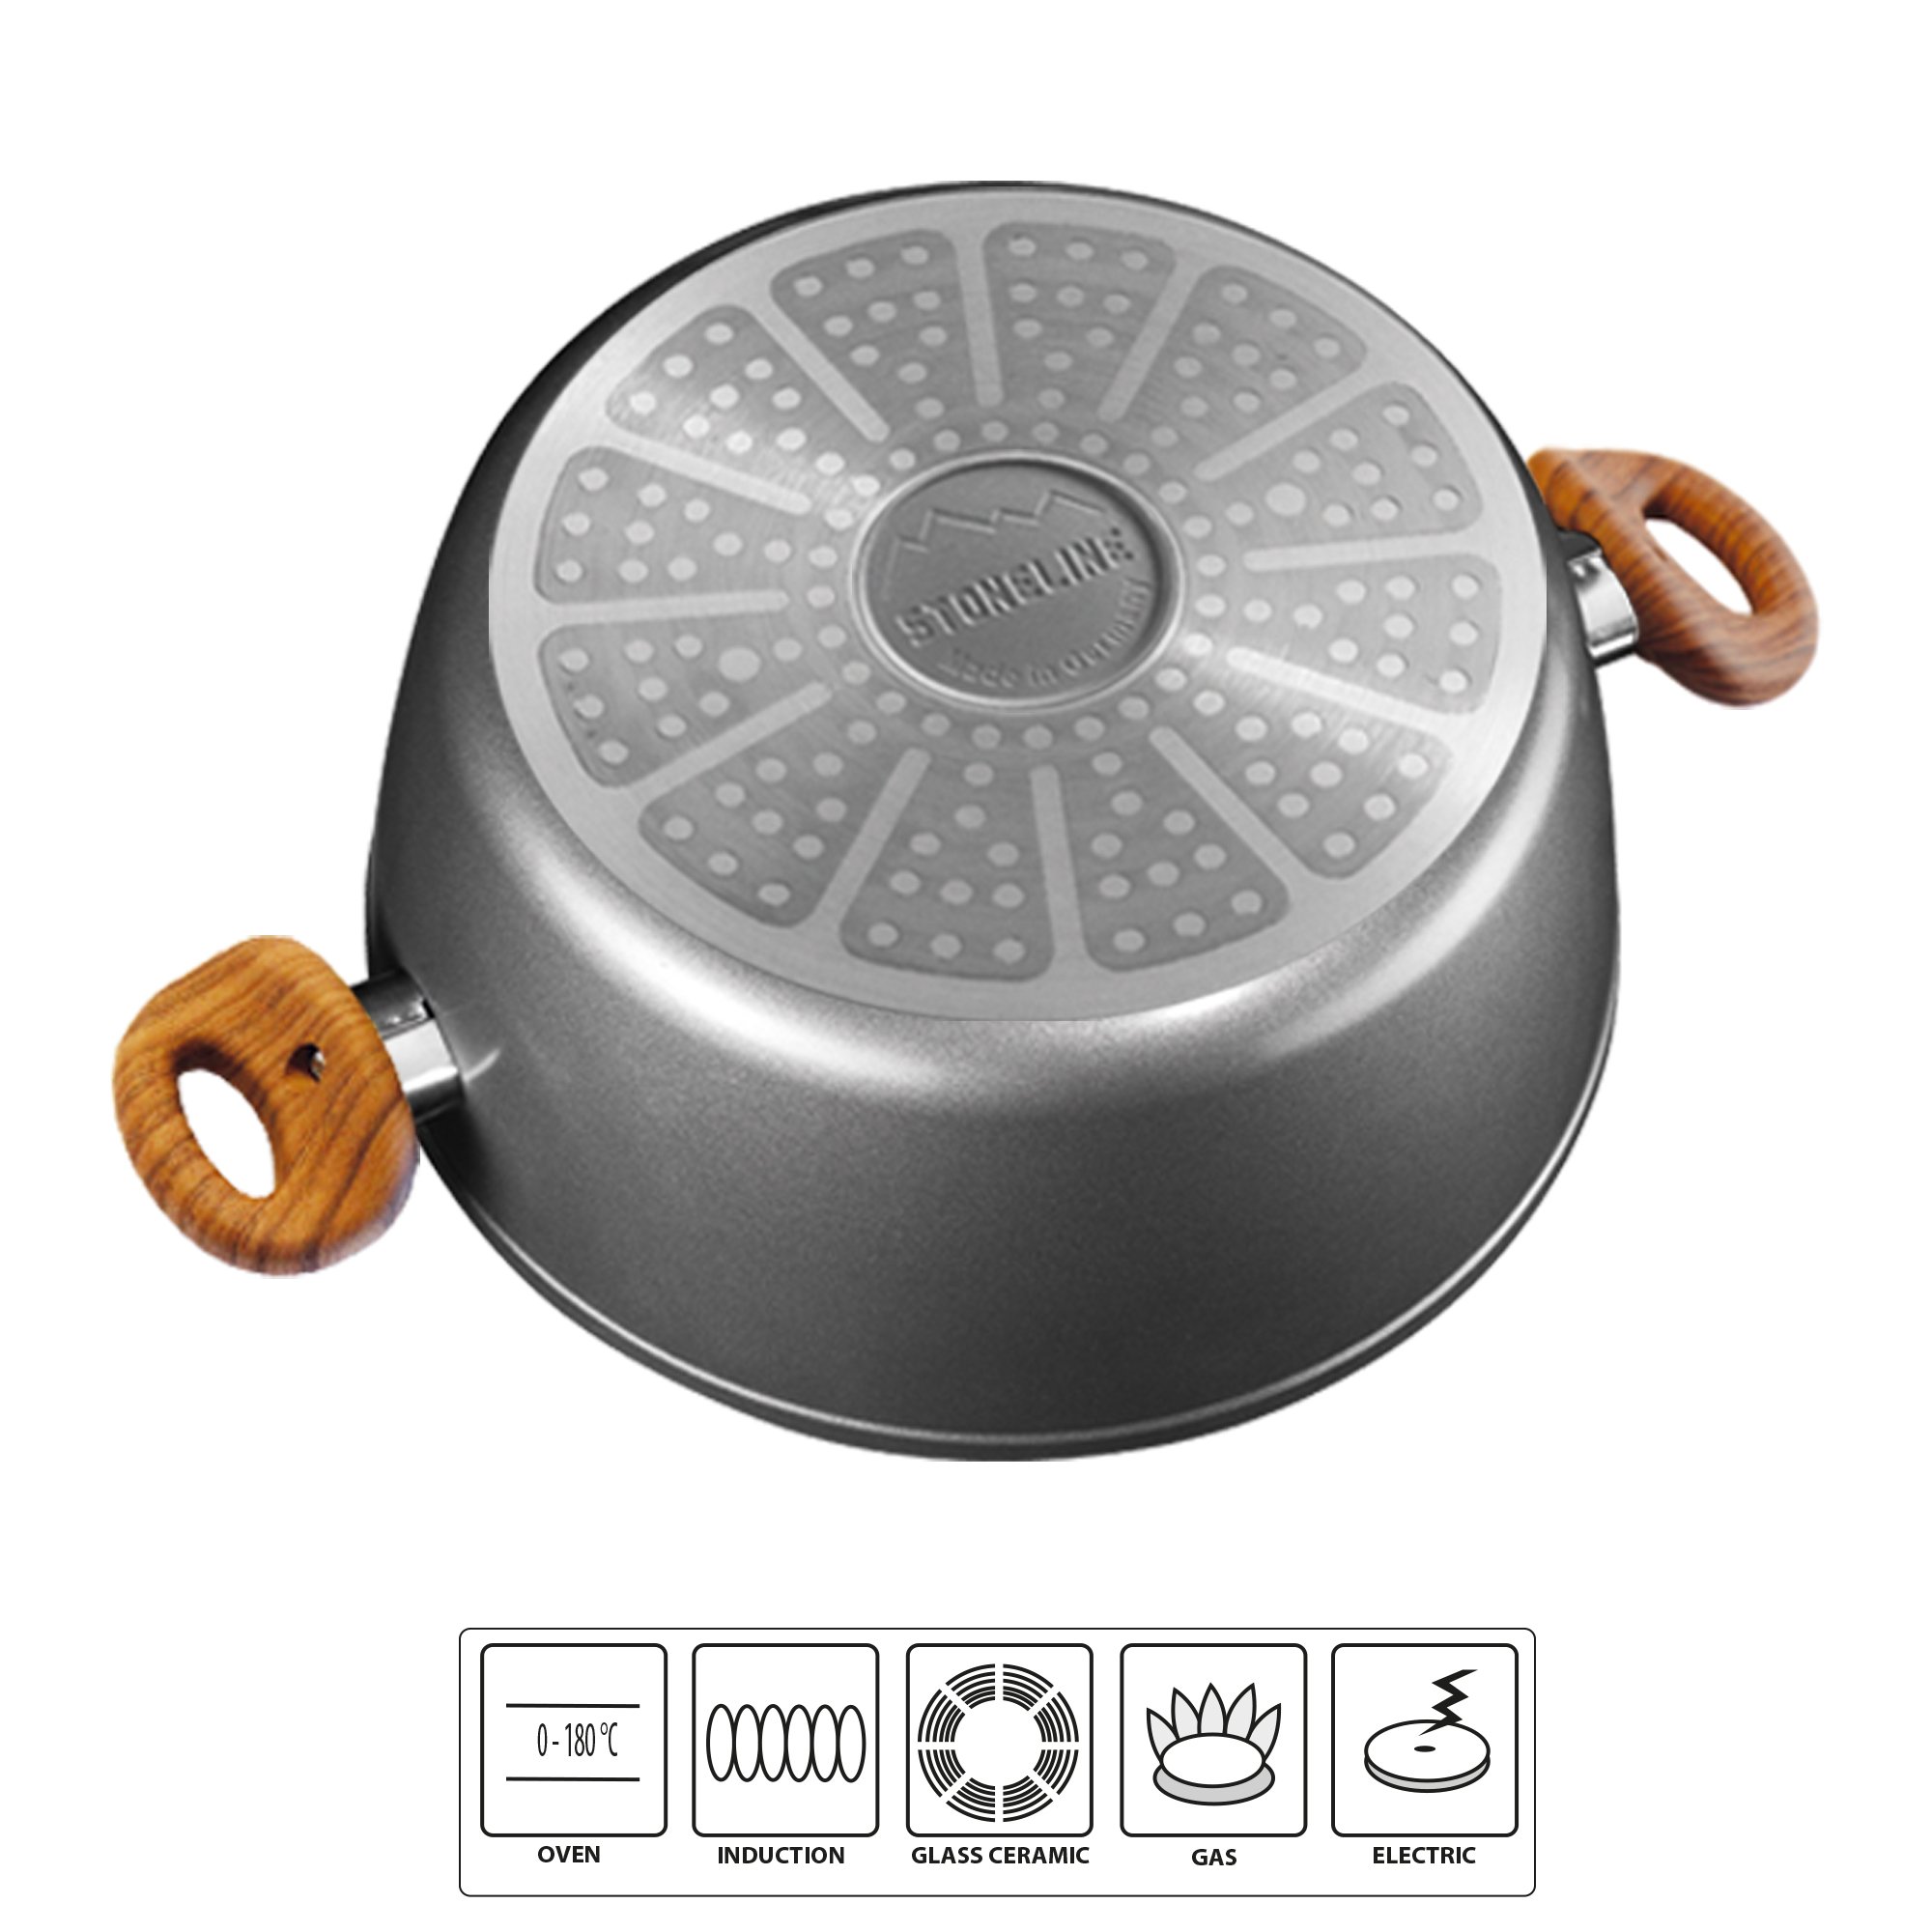 STONELINE® Cooking Pot 24 cm, with Lid | Made in Germany | Wood Design, Back to Nature